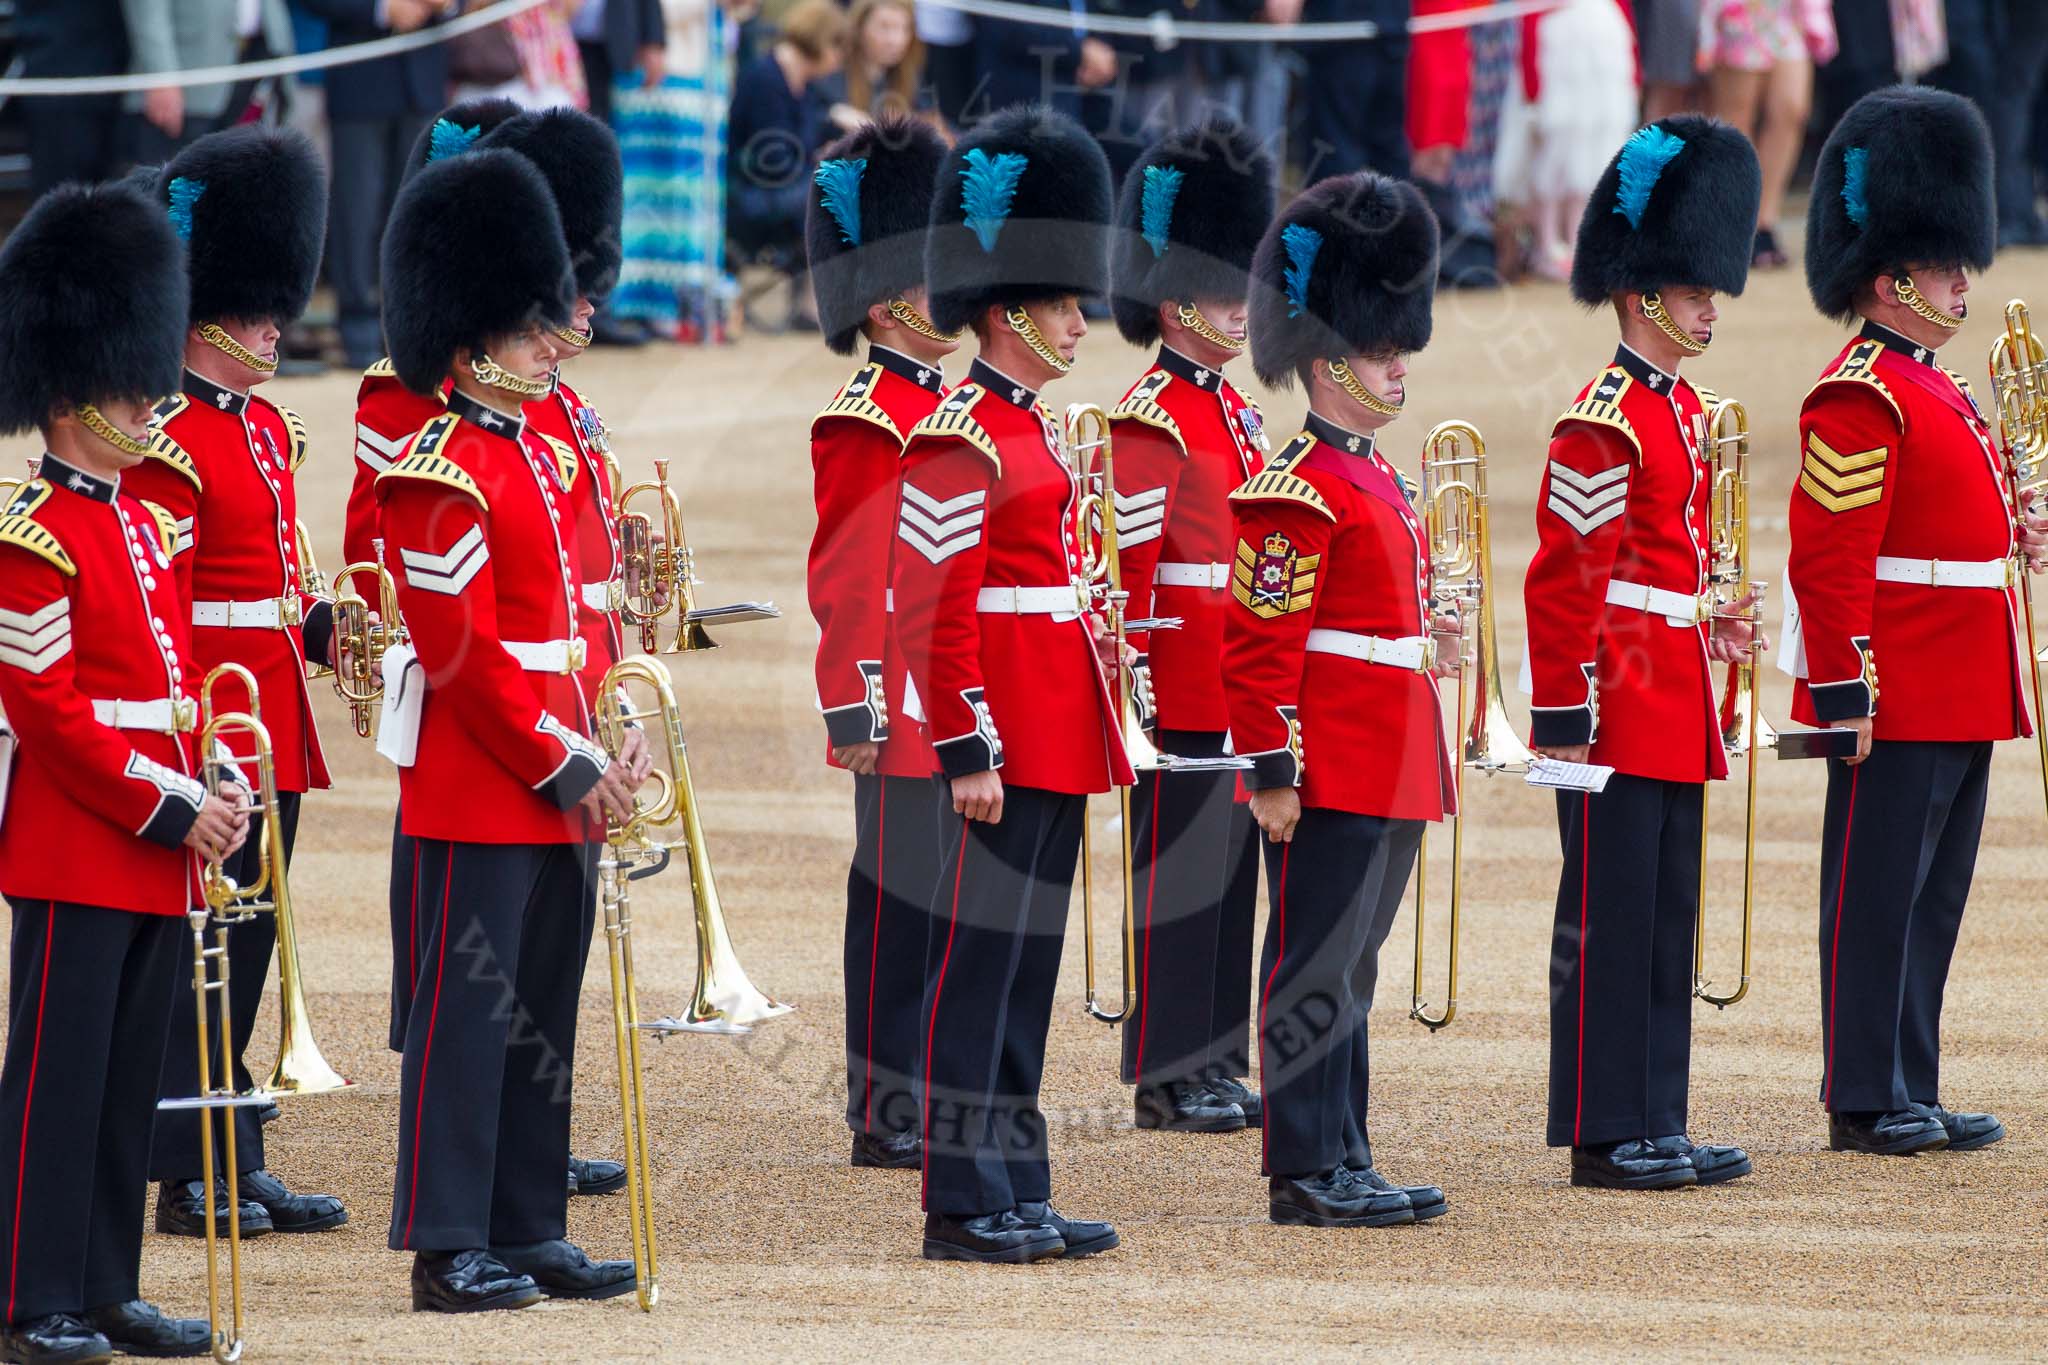 Trooping the Colour 2014.
Horse Guards Parade, Westminster,
London SW1A,

United Kingdom,
on 14 June 2014 at 10:17, image #110